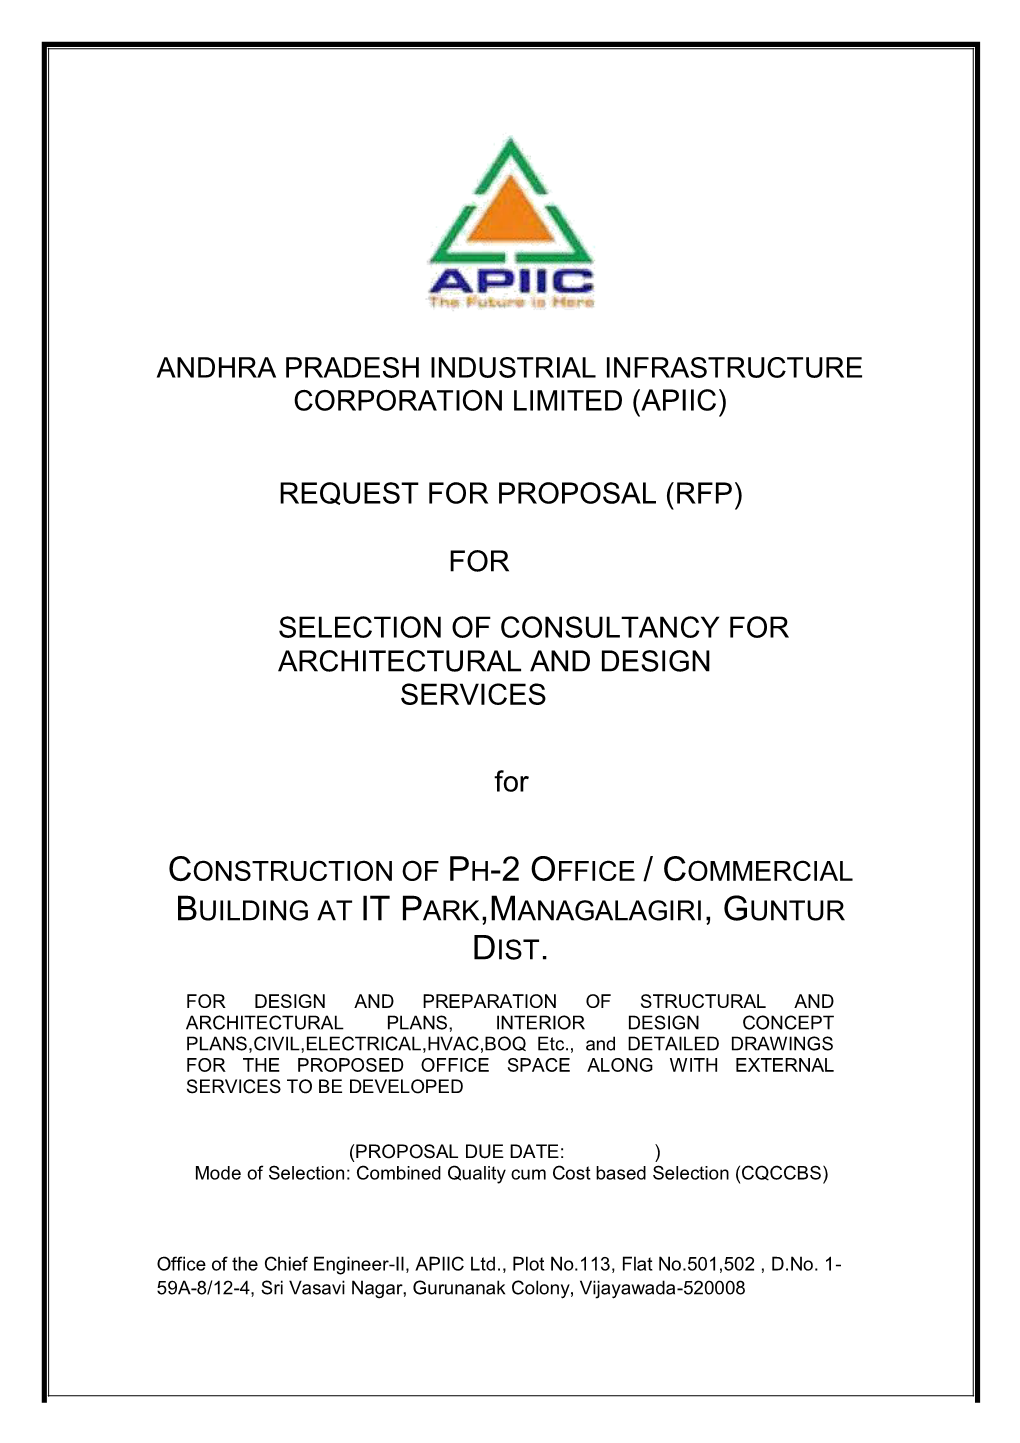 Request for Proposal (Rfp) for Selection of Consultancy for Architectural and Design Services